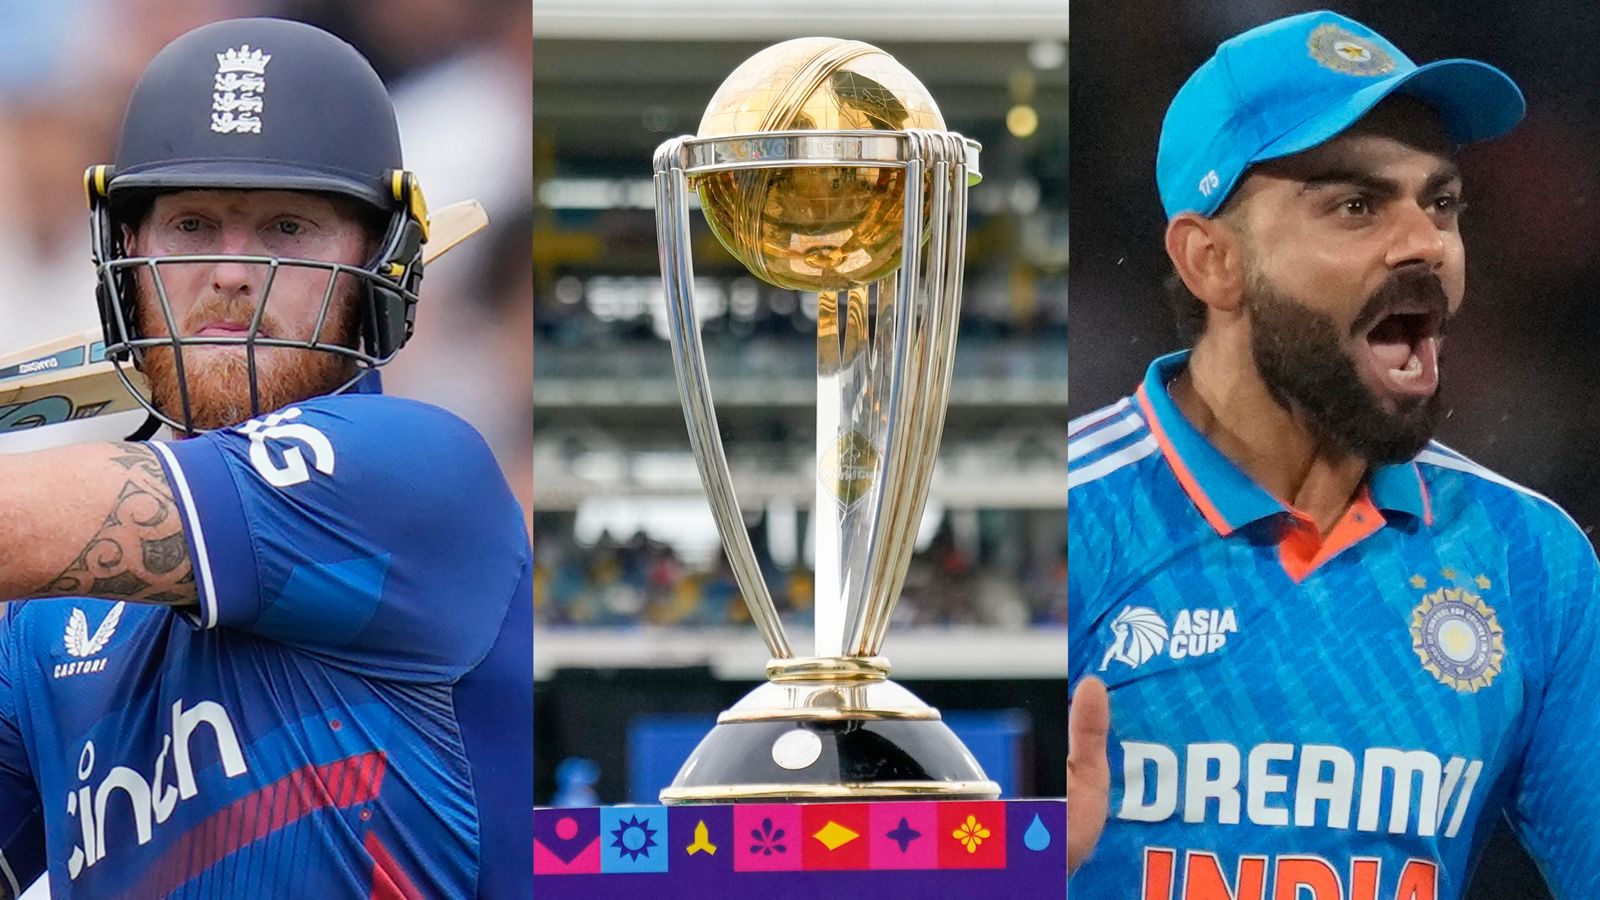 India Cricket WCup, Sports